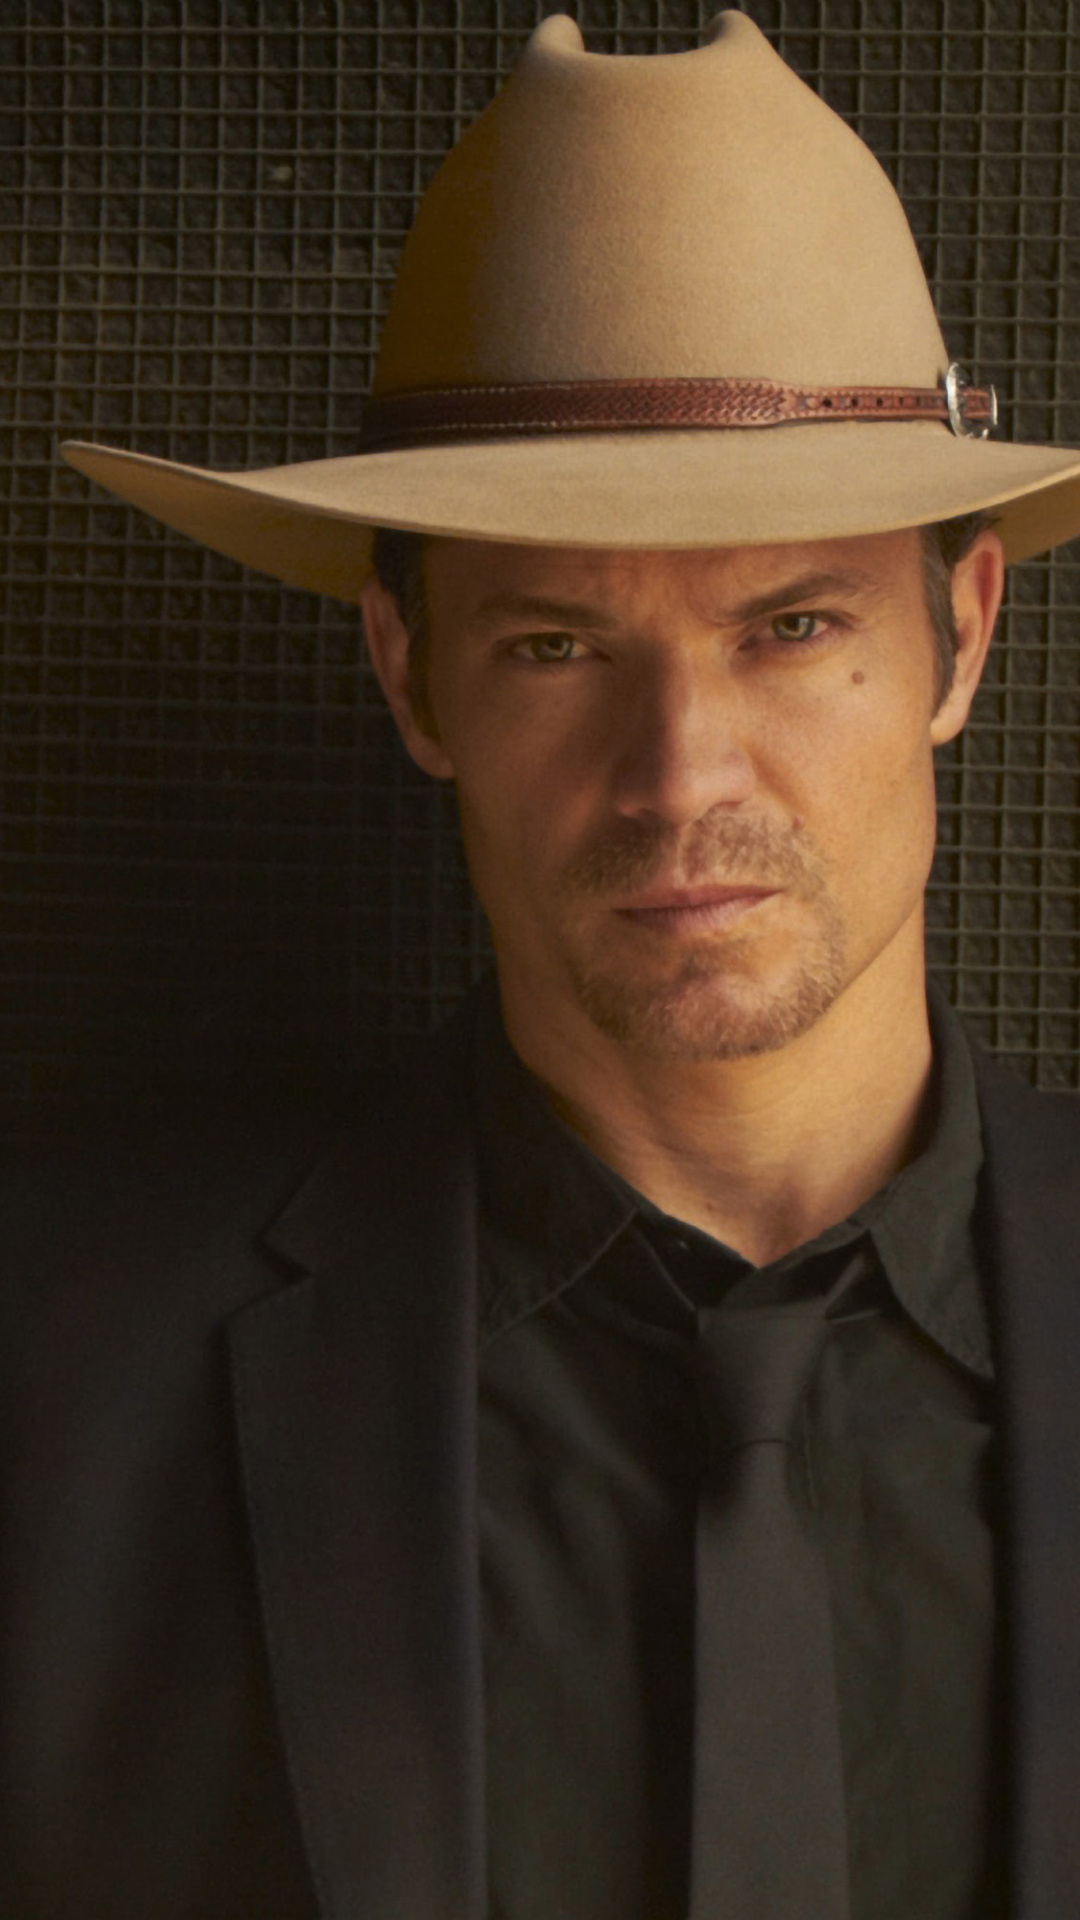 Justified TV Series, Timothy Olyphant interview, In-depth discussion, TV series analysis, 1080x1920 Full HD Phone